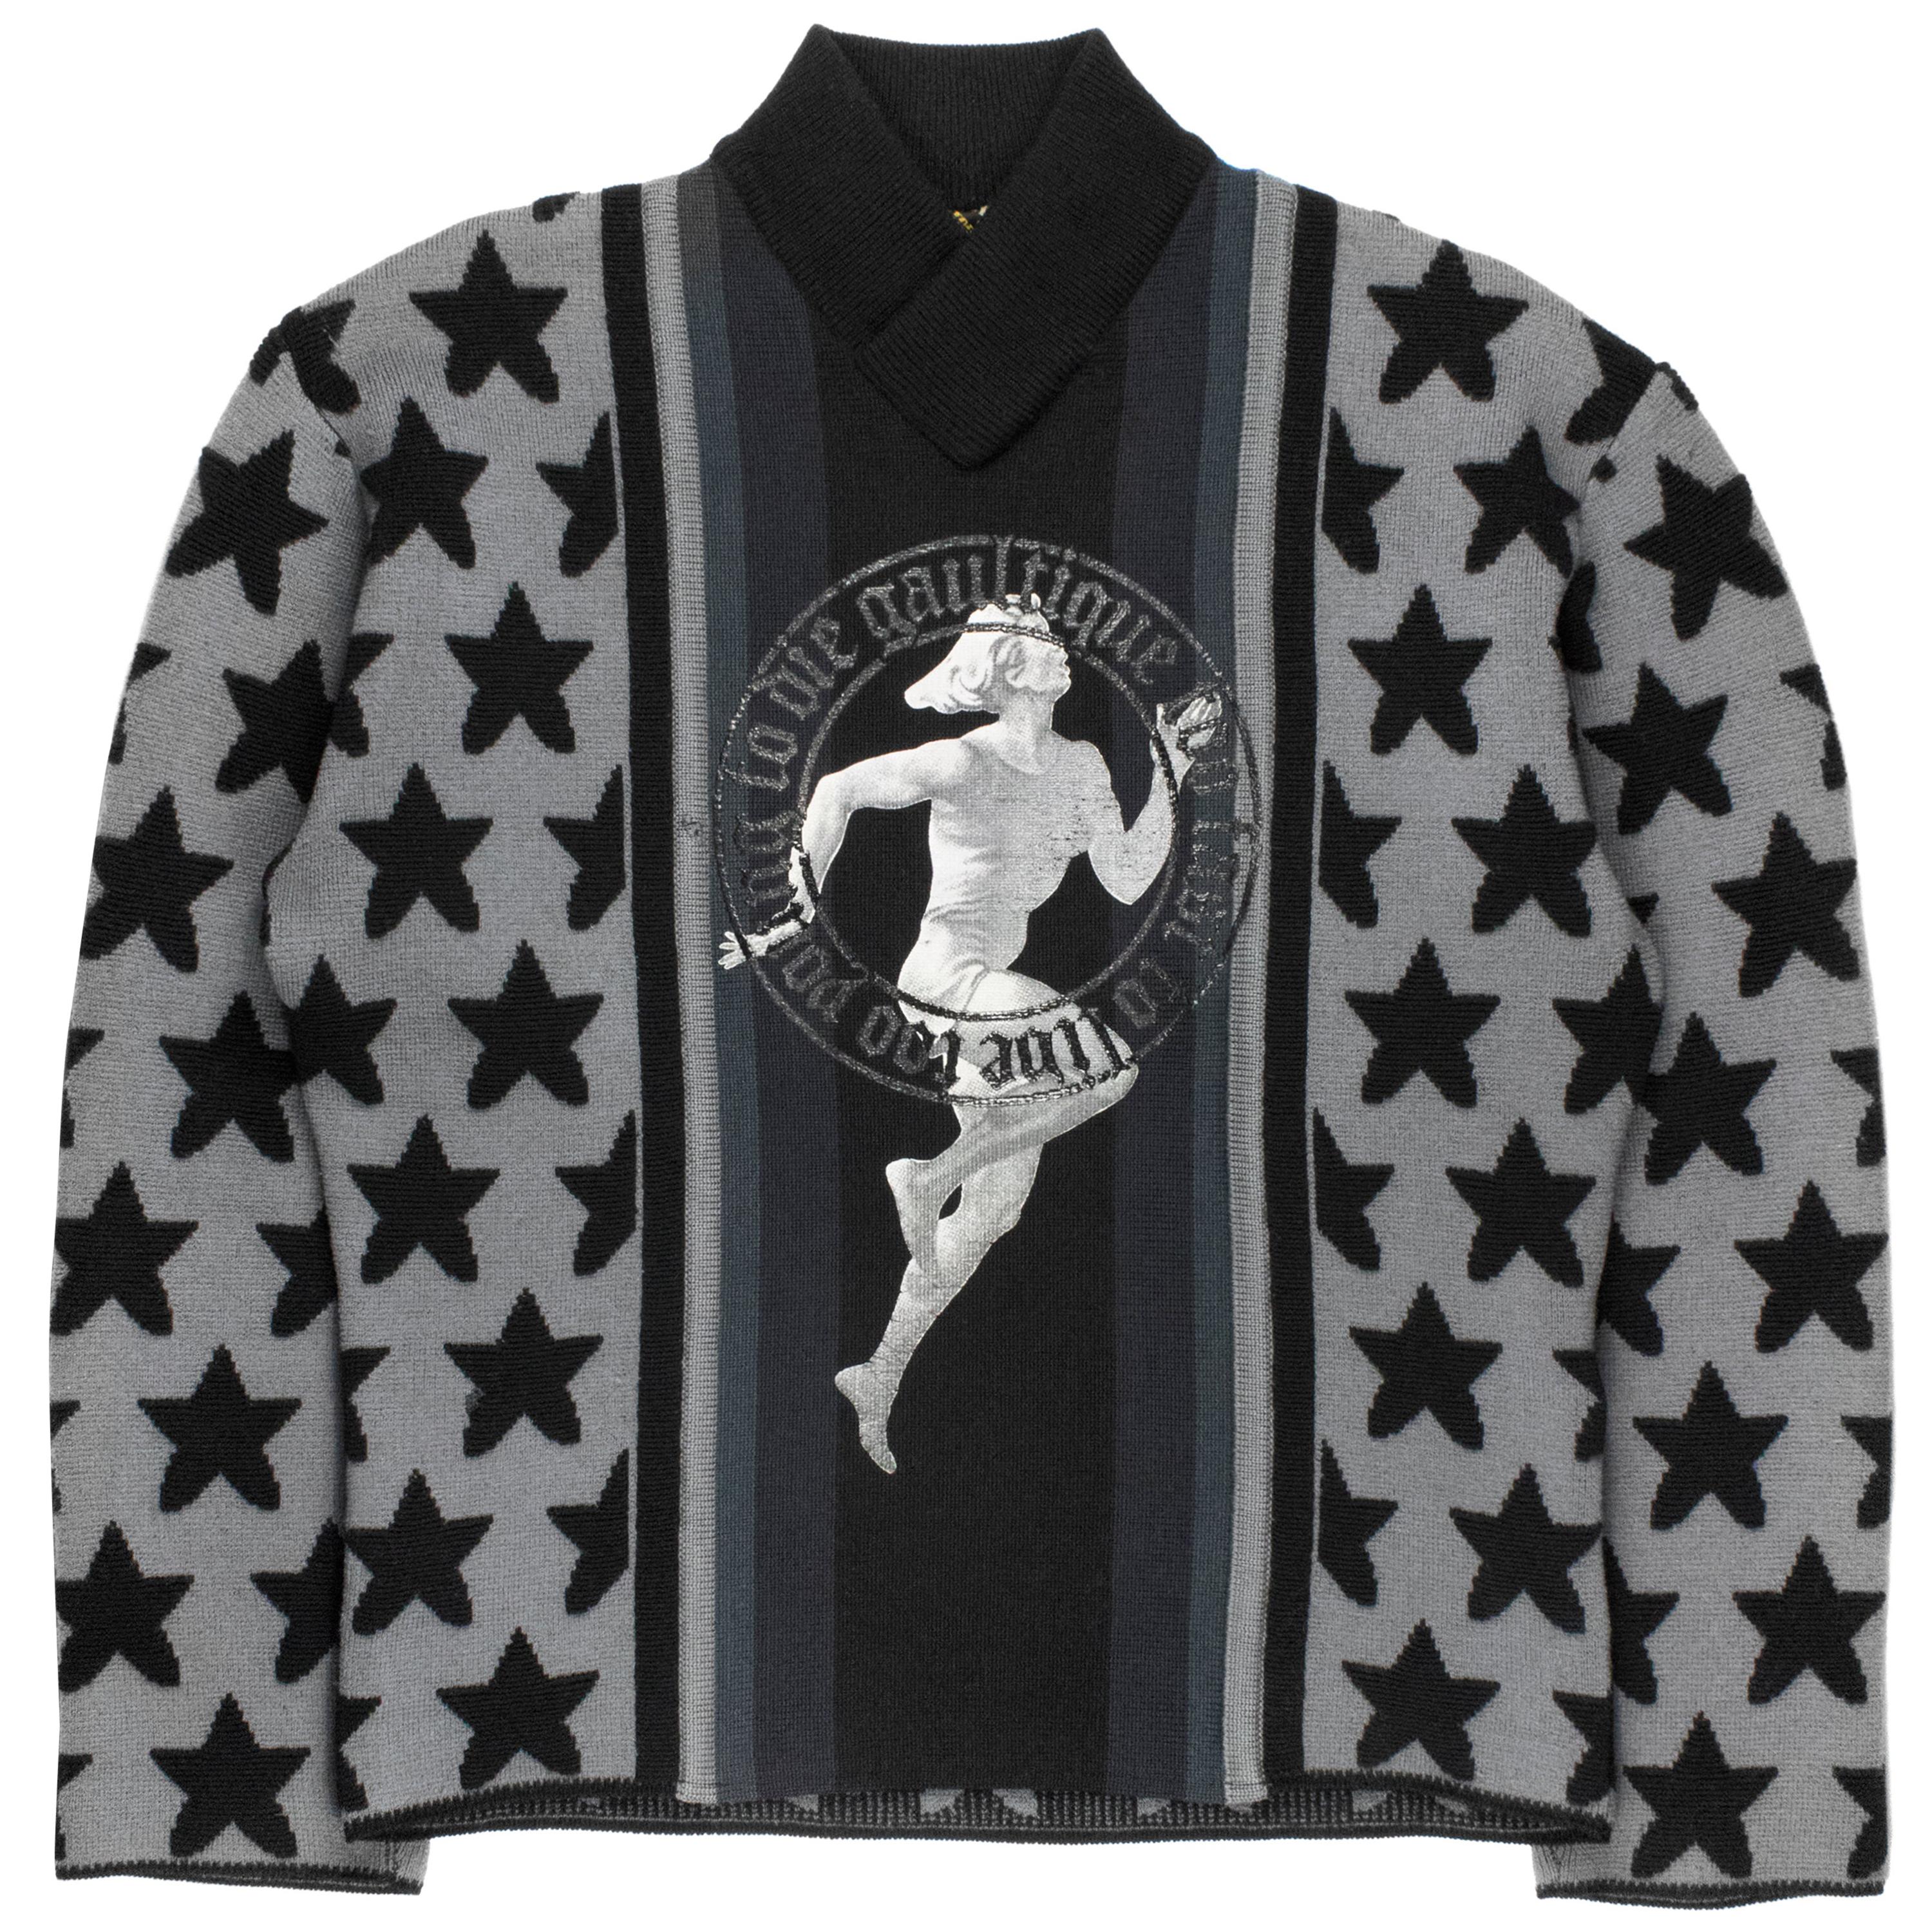 Jean Paul Gaultier AW1987 "Too Young to Die" Sweater